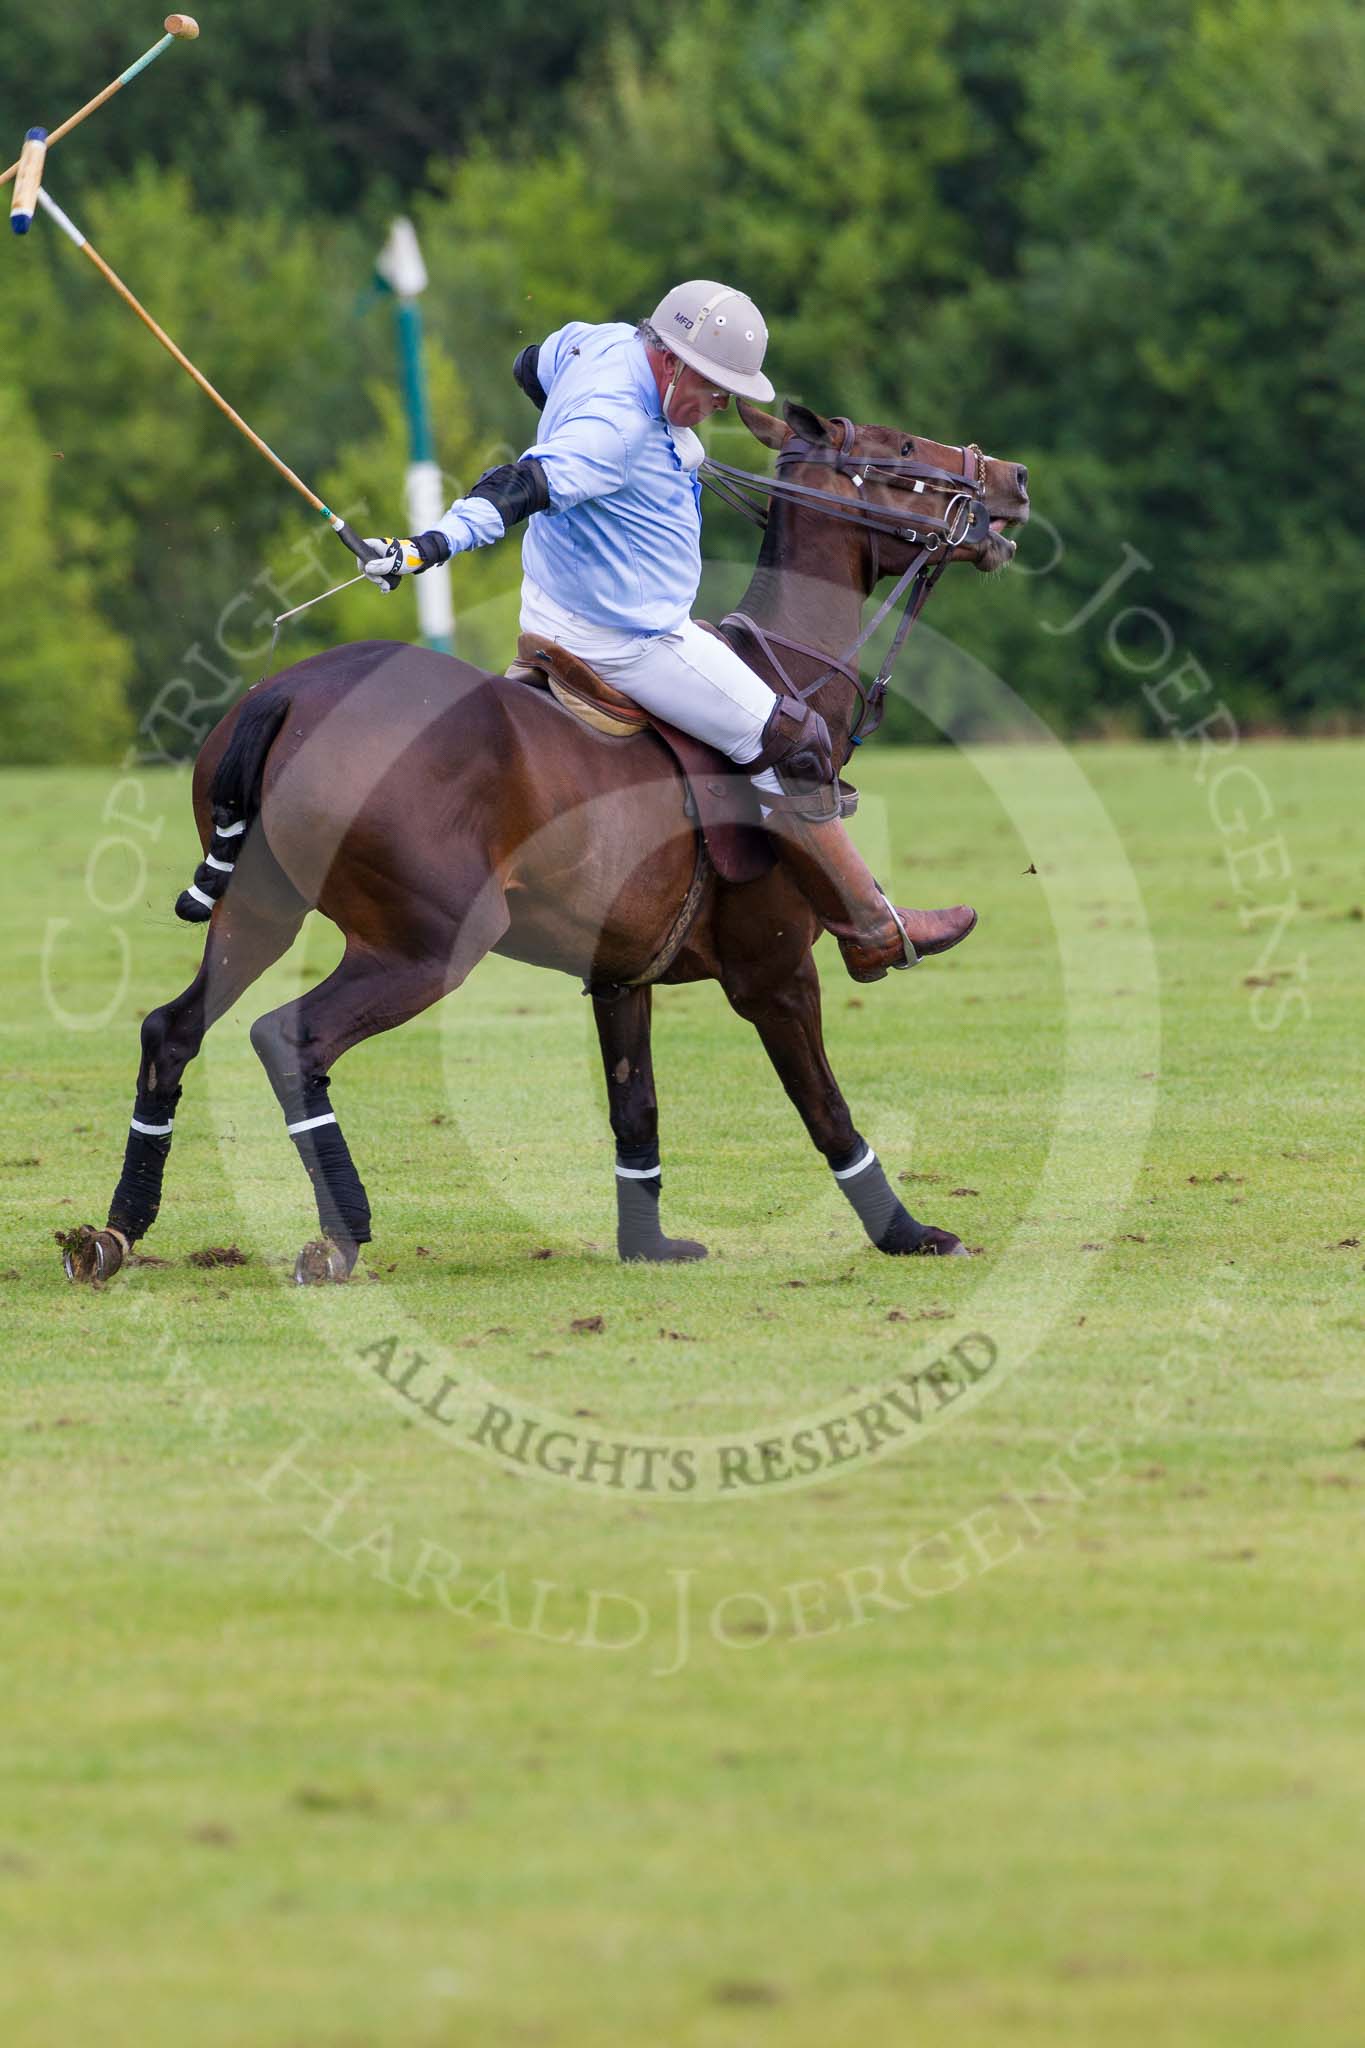 7th Heritage Polo Cup semi-finals: Mariano Darritchon with a back stroke..
Hurtwood Park Polo Club,
Ewhurst Green,
Surrey,
United Kingdom,
on 04 August 2012 at 15:55, image #301